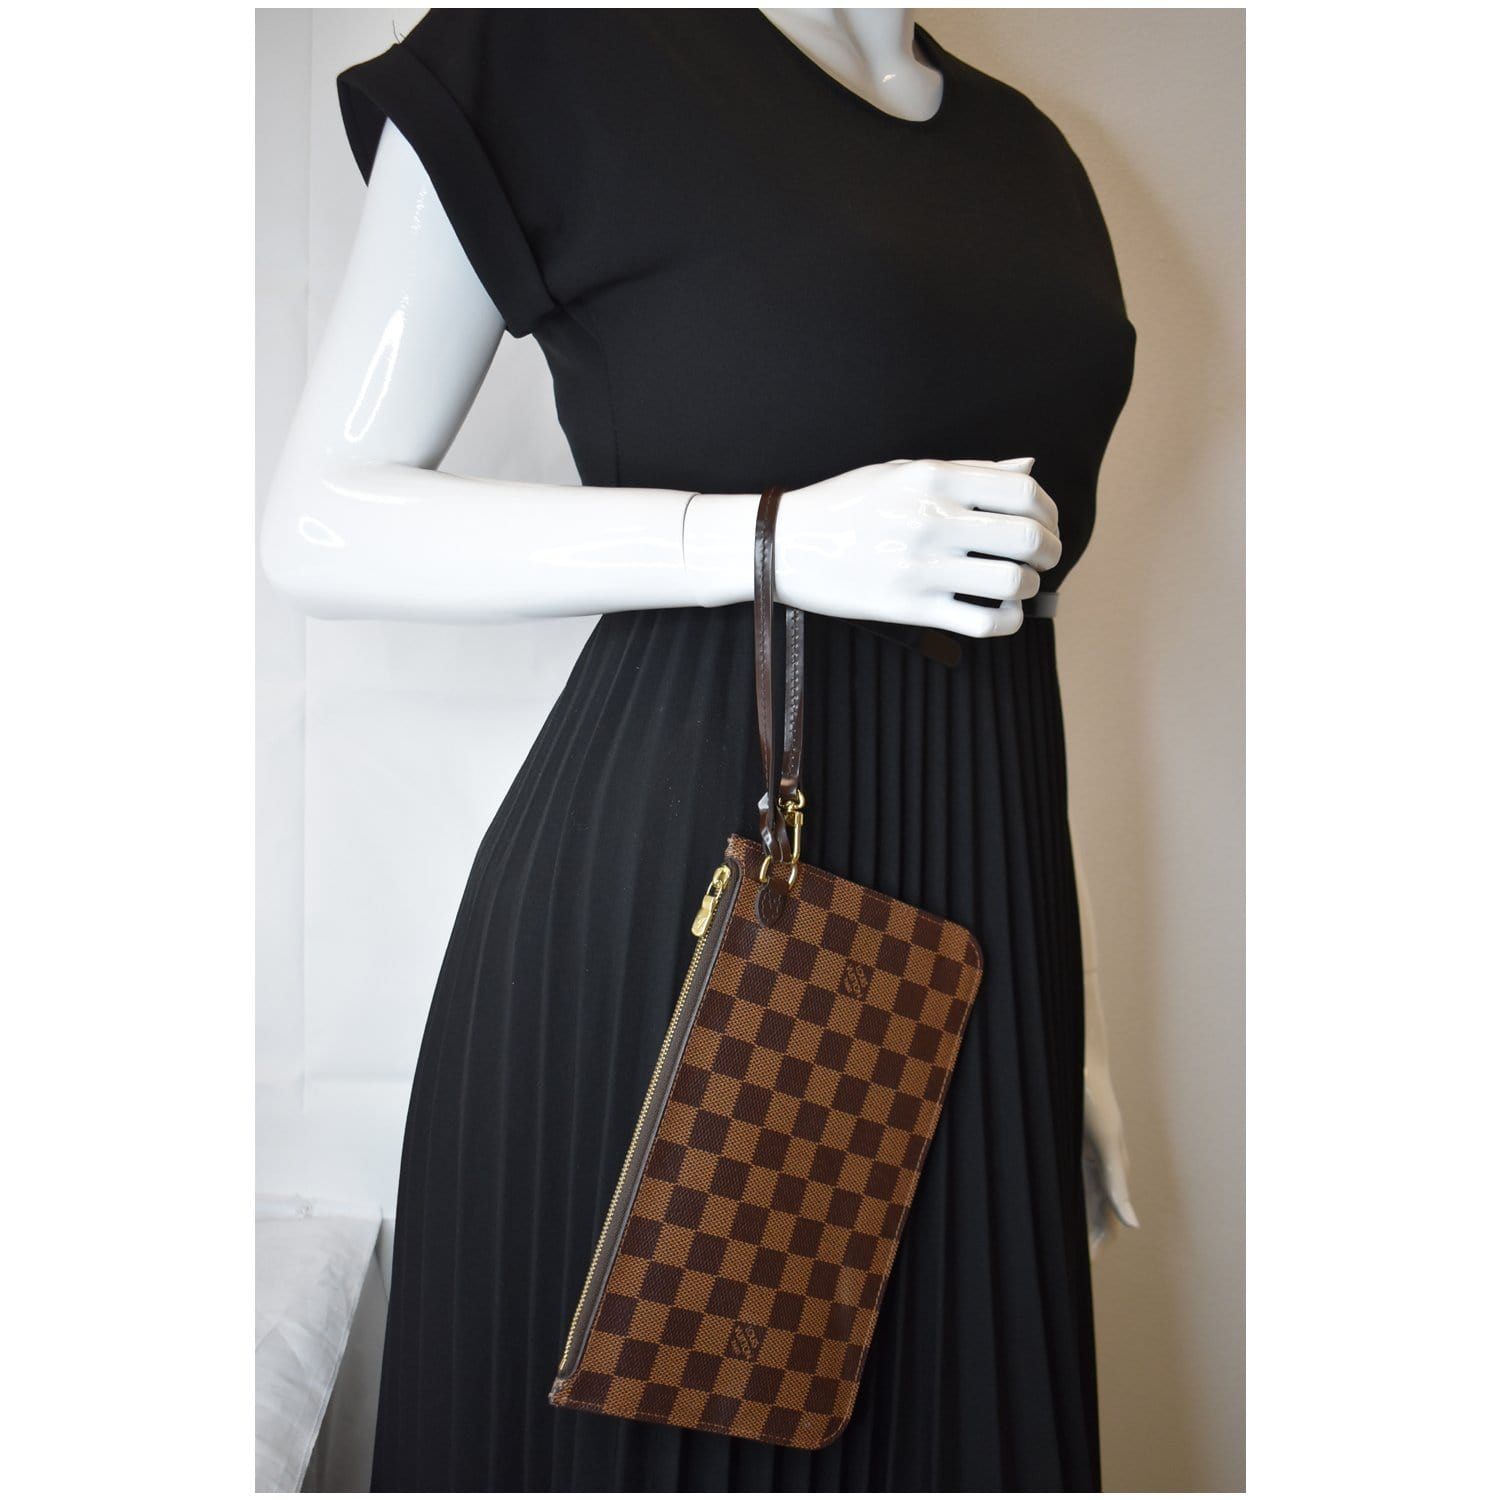 Check out this gorgeous Louis Vuitton Neverfull Pouch Wristlet🤍✨ . Di